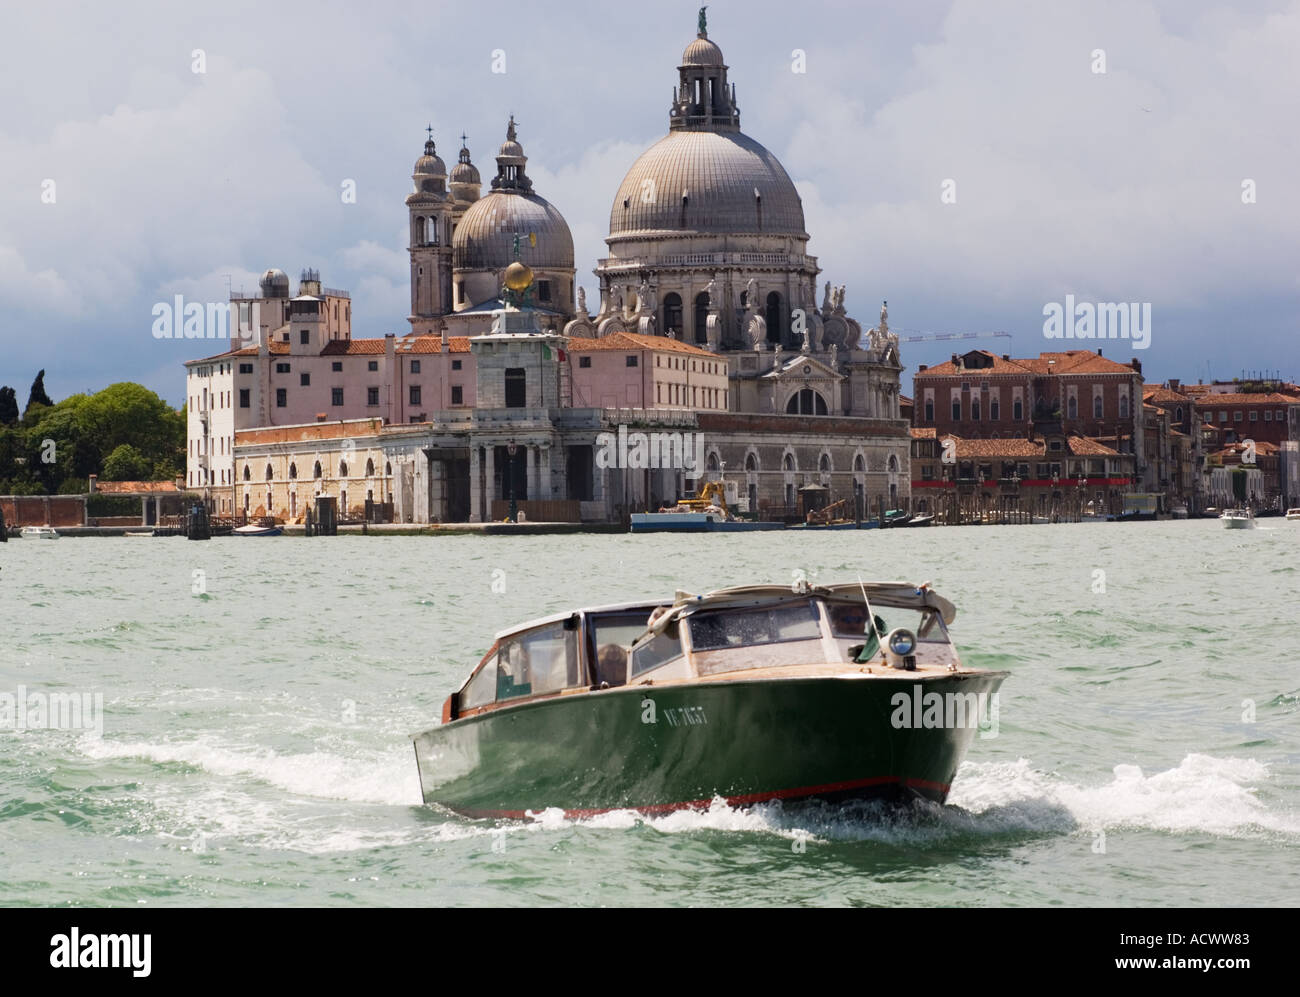 domes and spires of Chiesa Santa Maria della Salute and the banks of Venice from canal with green motor boat Stock Photo